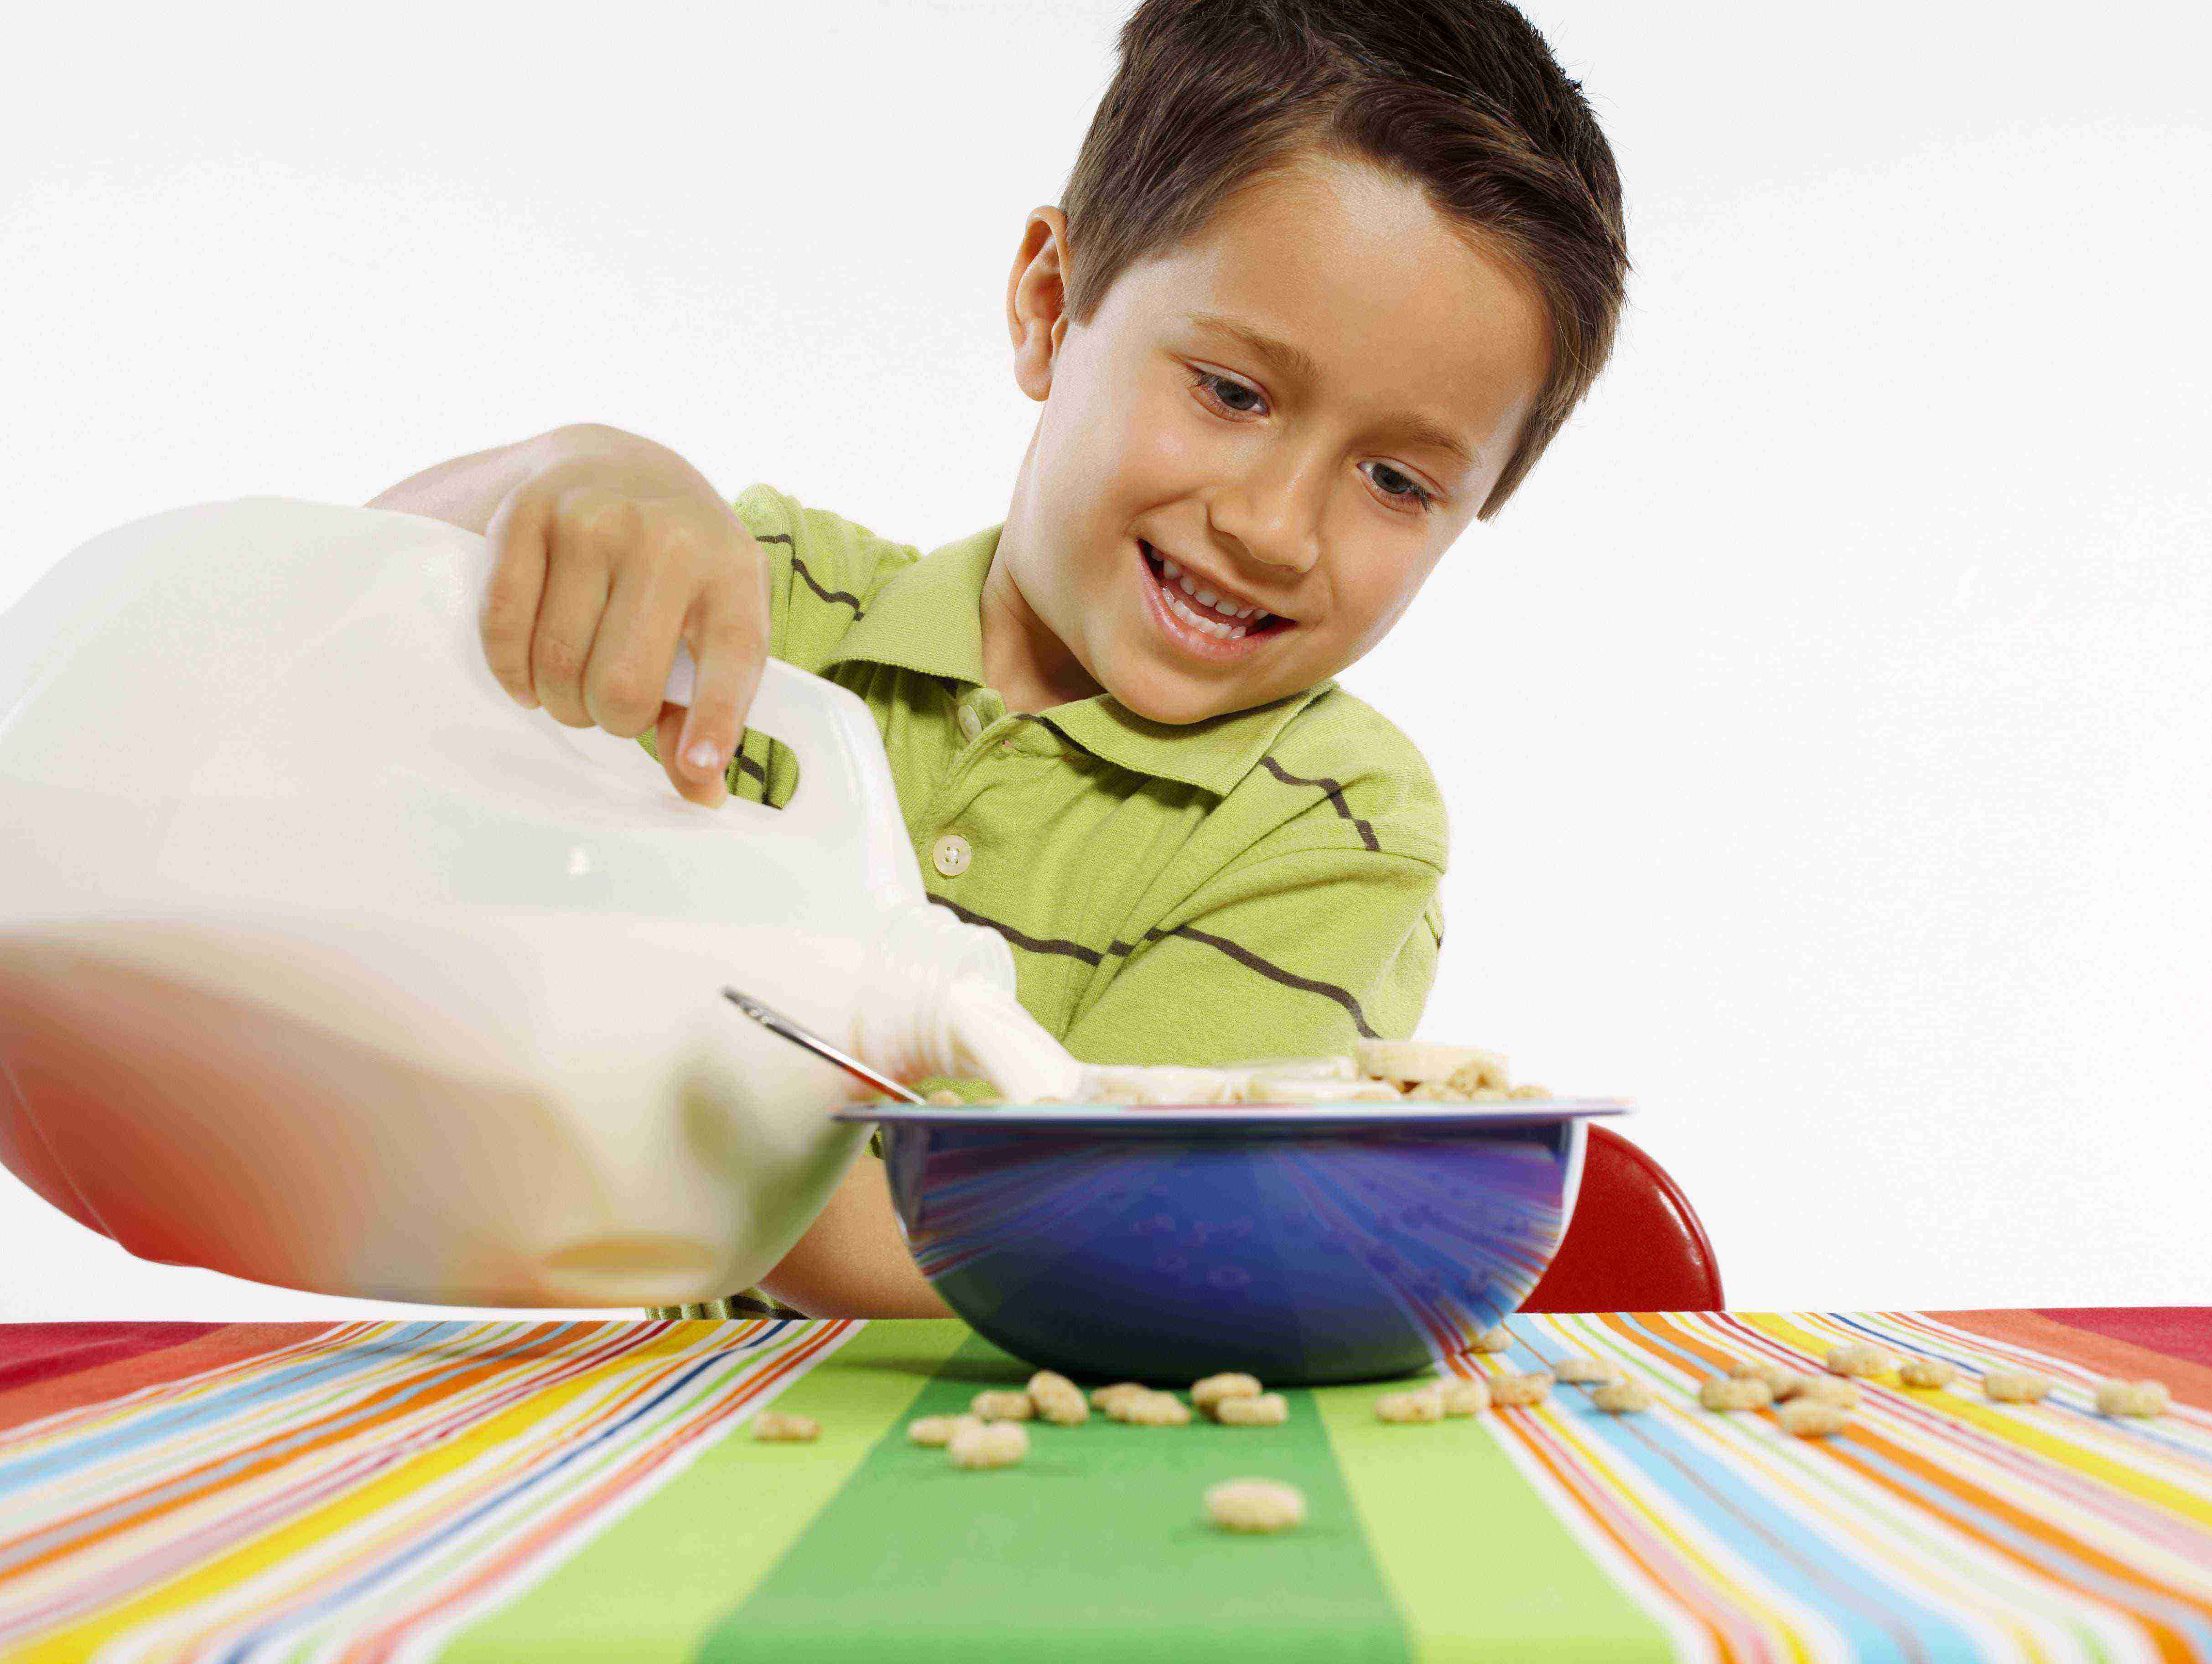 A young boy is pouring milk into a cereal bowl